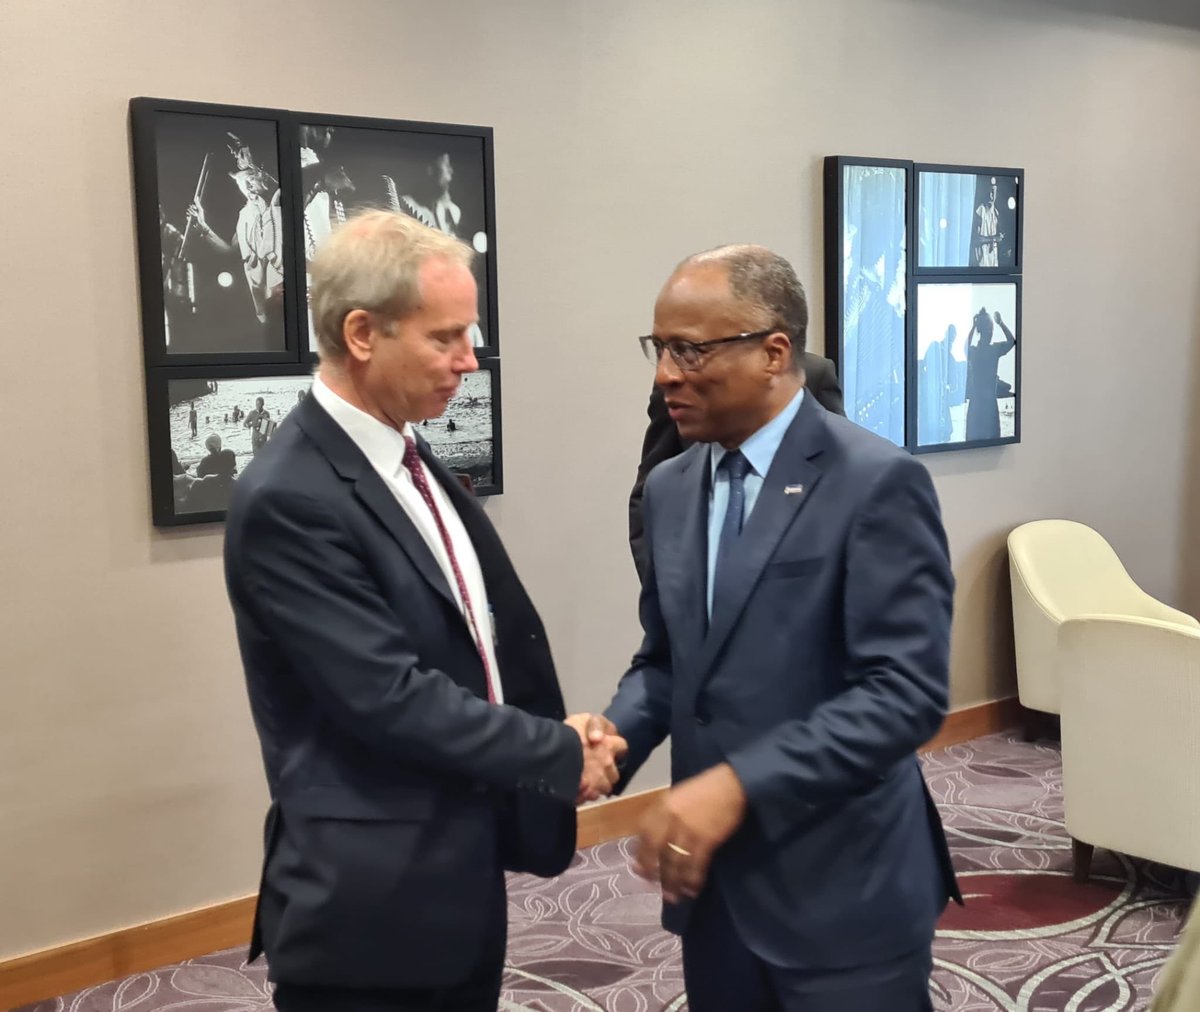 A pleasure to meet with the Prime Minister of Cabo Verde Ulisses Correia e Silva. We discussed ways to enhance our strategic partnership and how to better promote democratic values and #HumanRights. Cabo Verde is a partner leading by example.